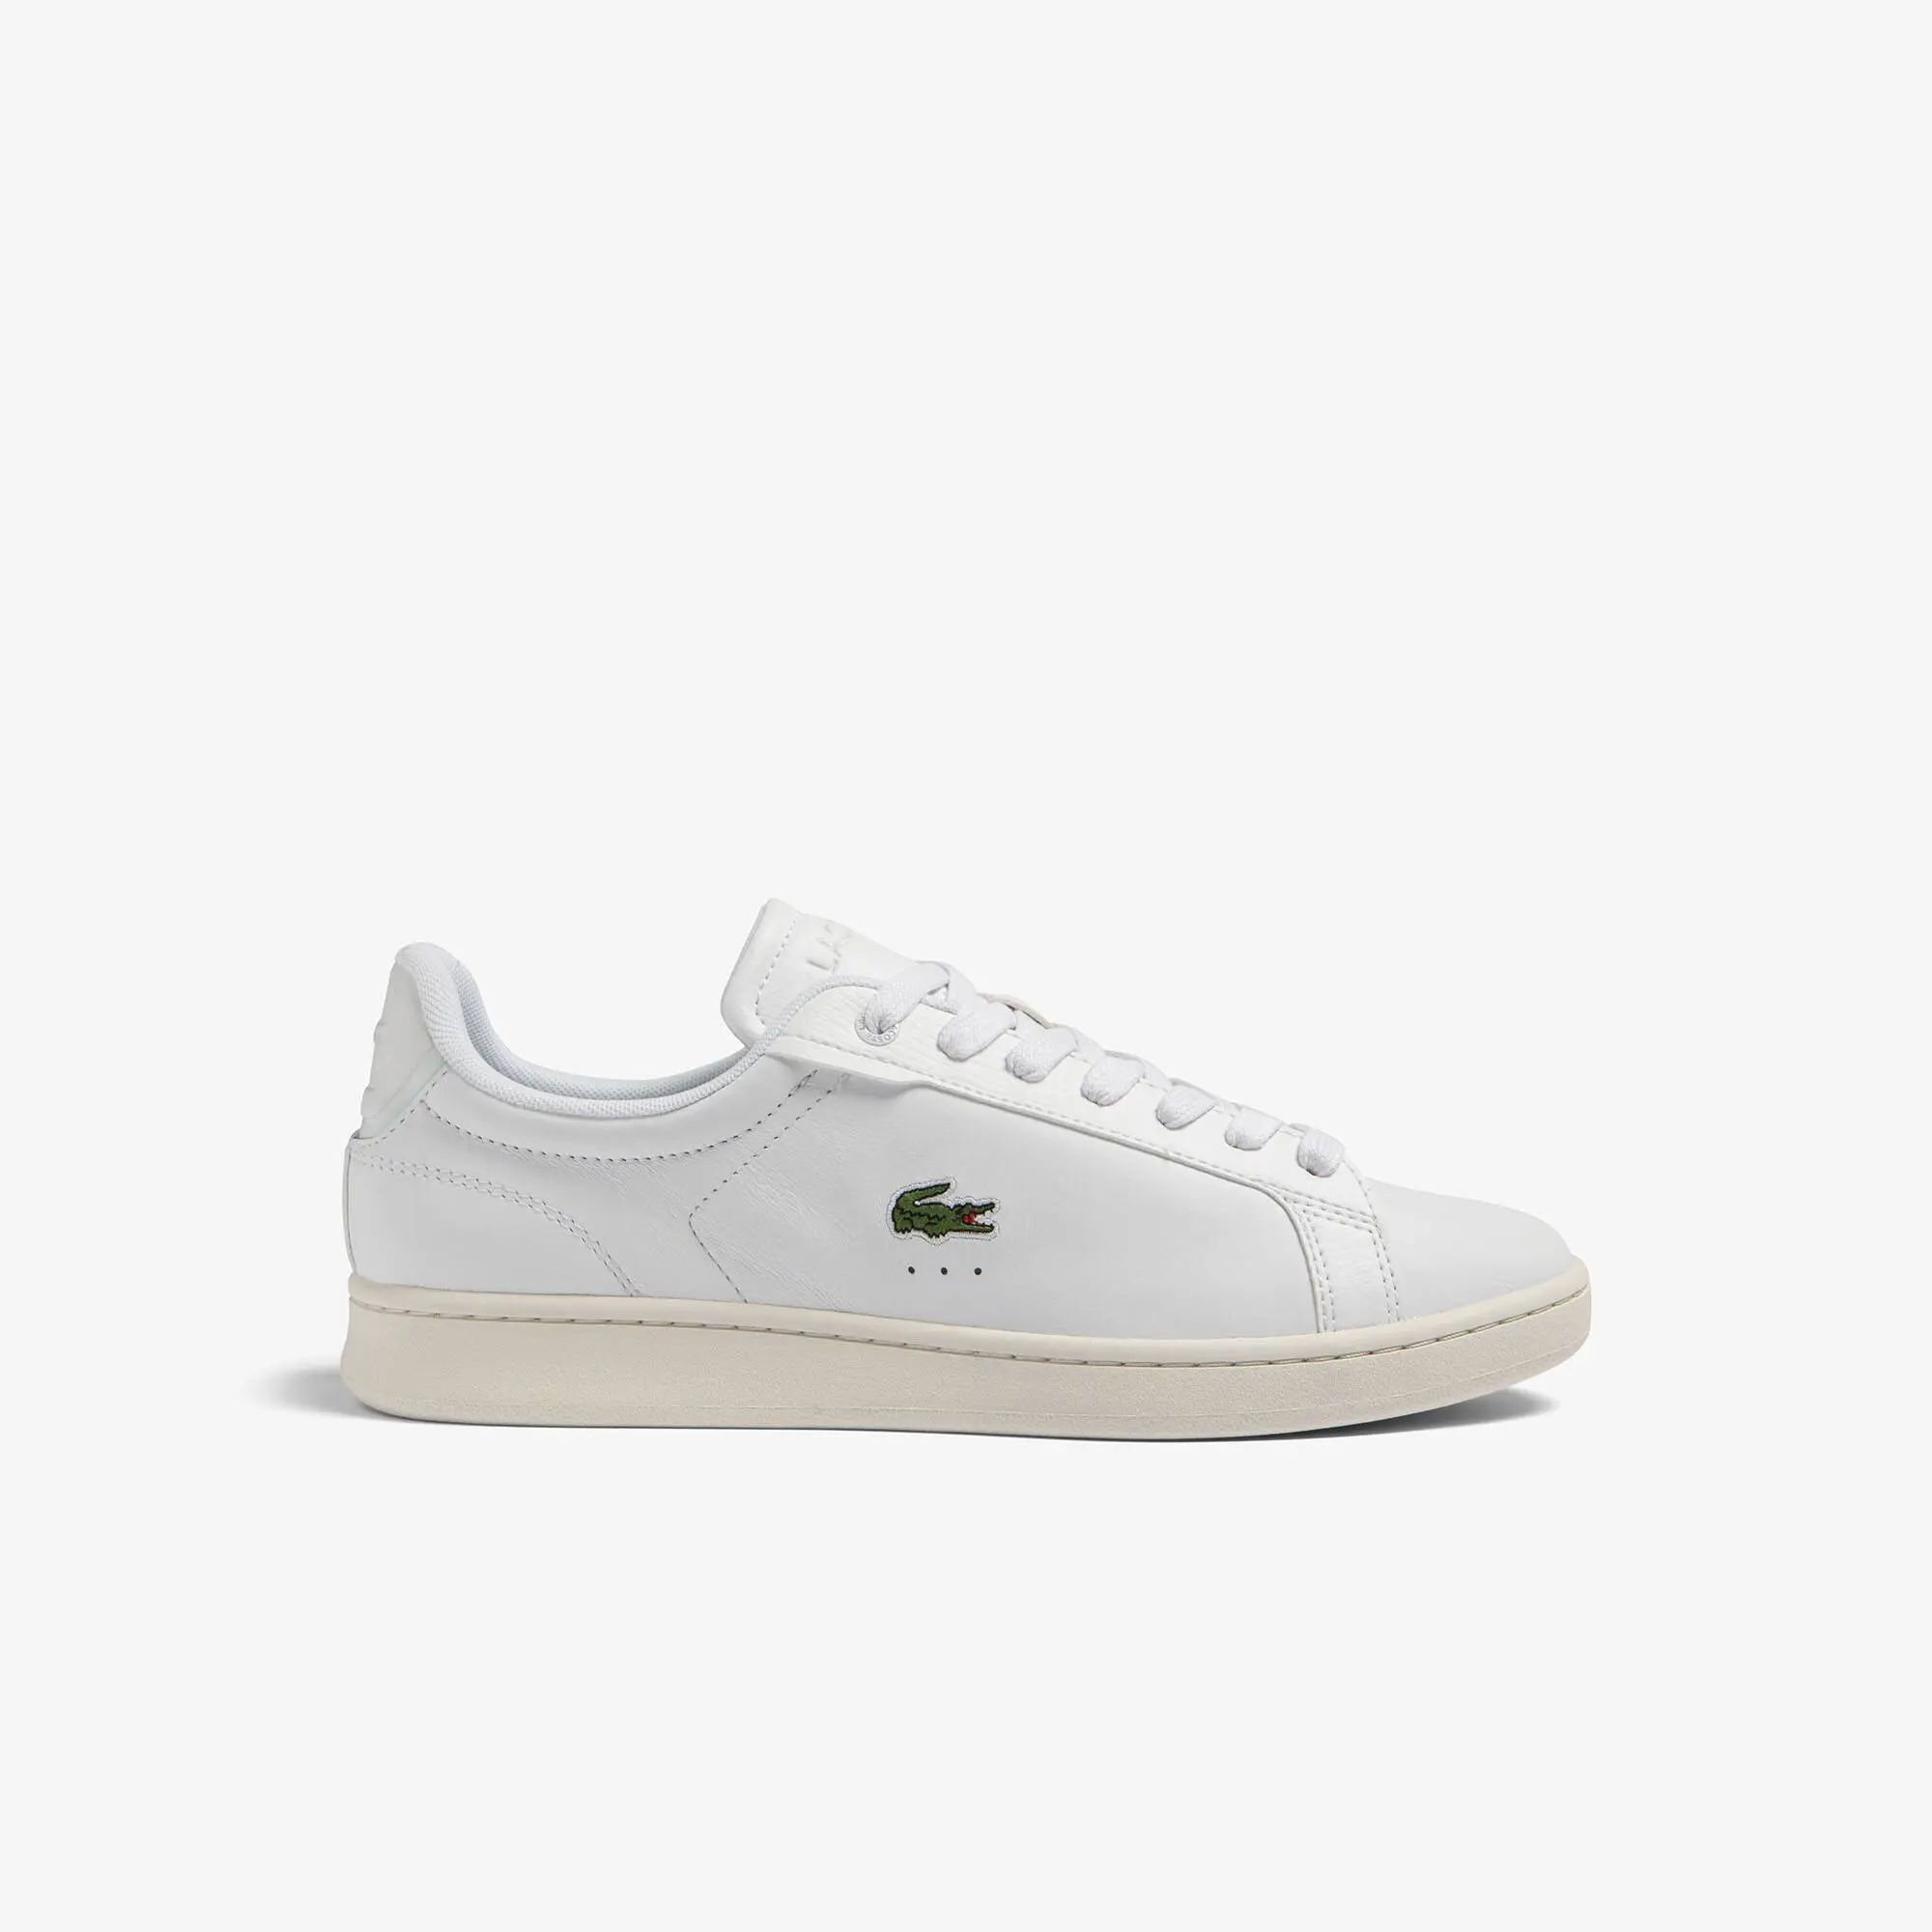 Lacoste Men's Lacoste Carnaby Pro Leather Premium Trainers. 1